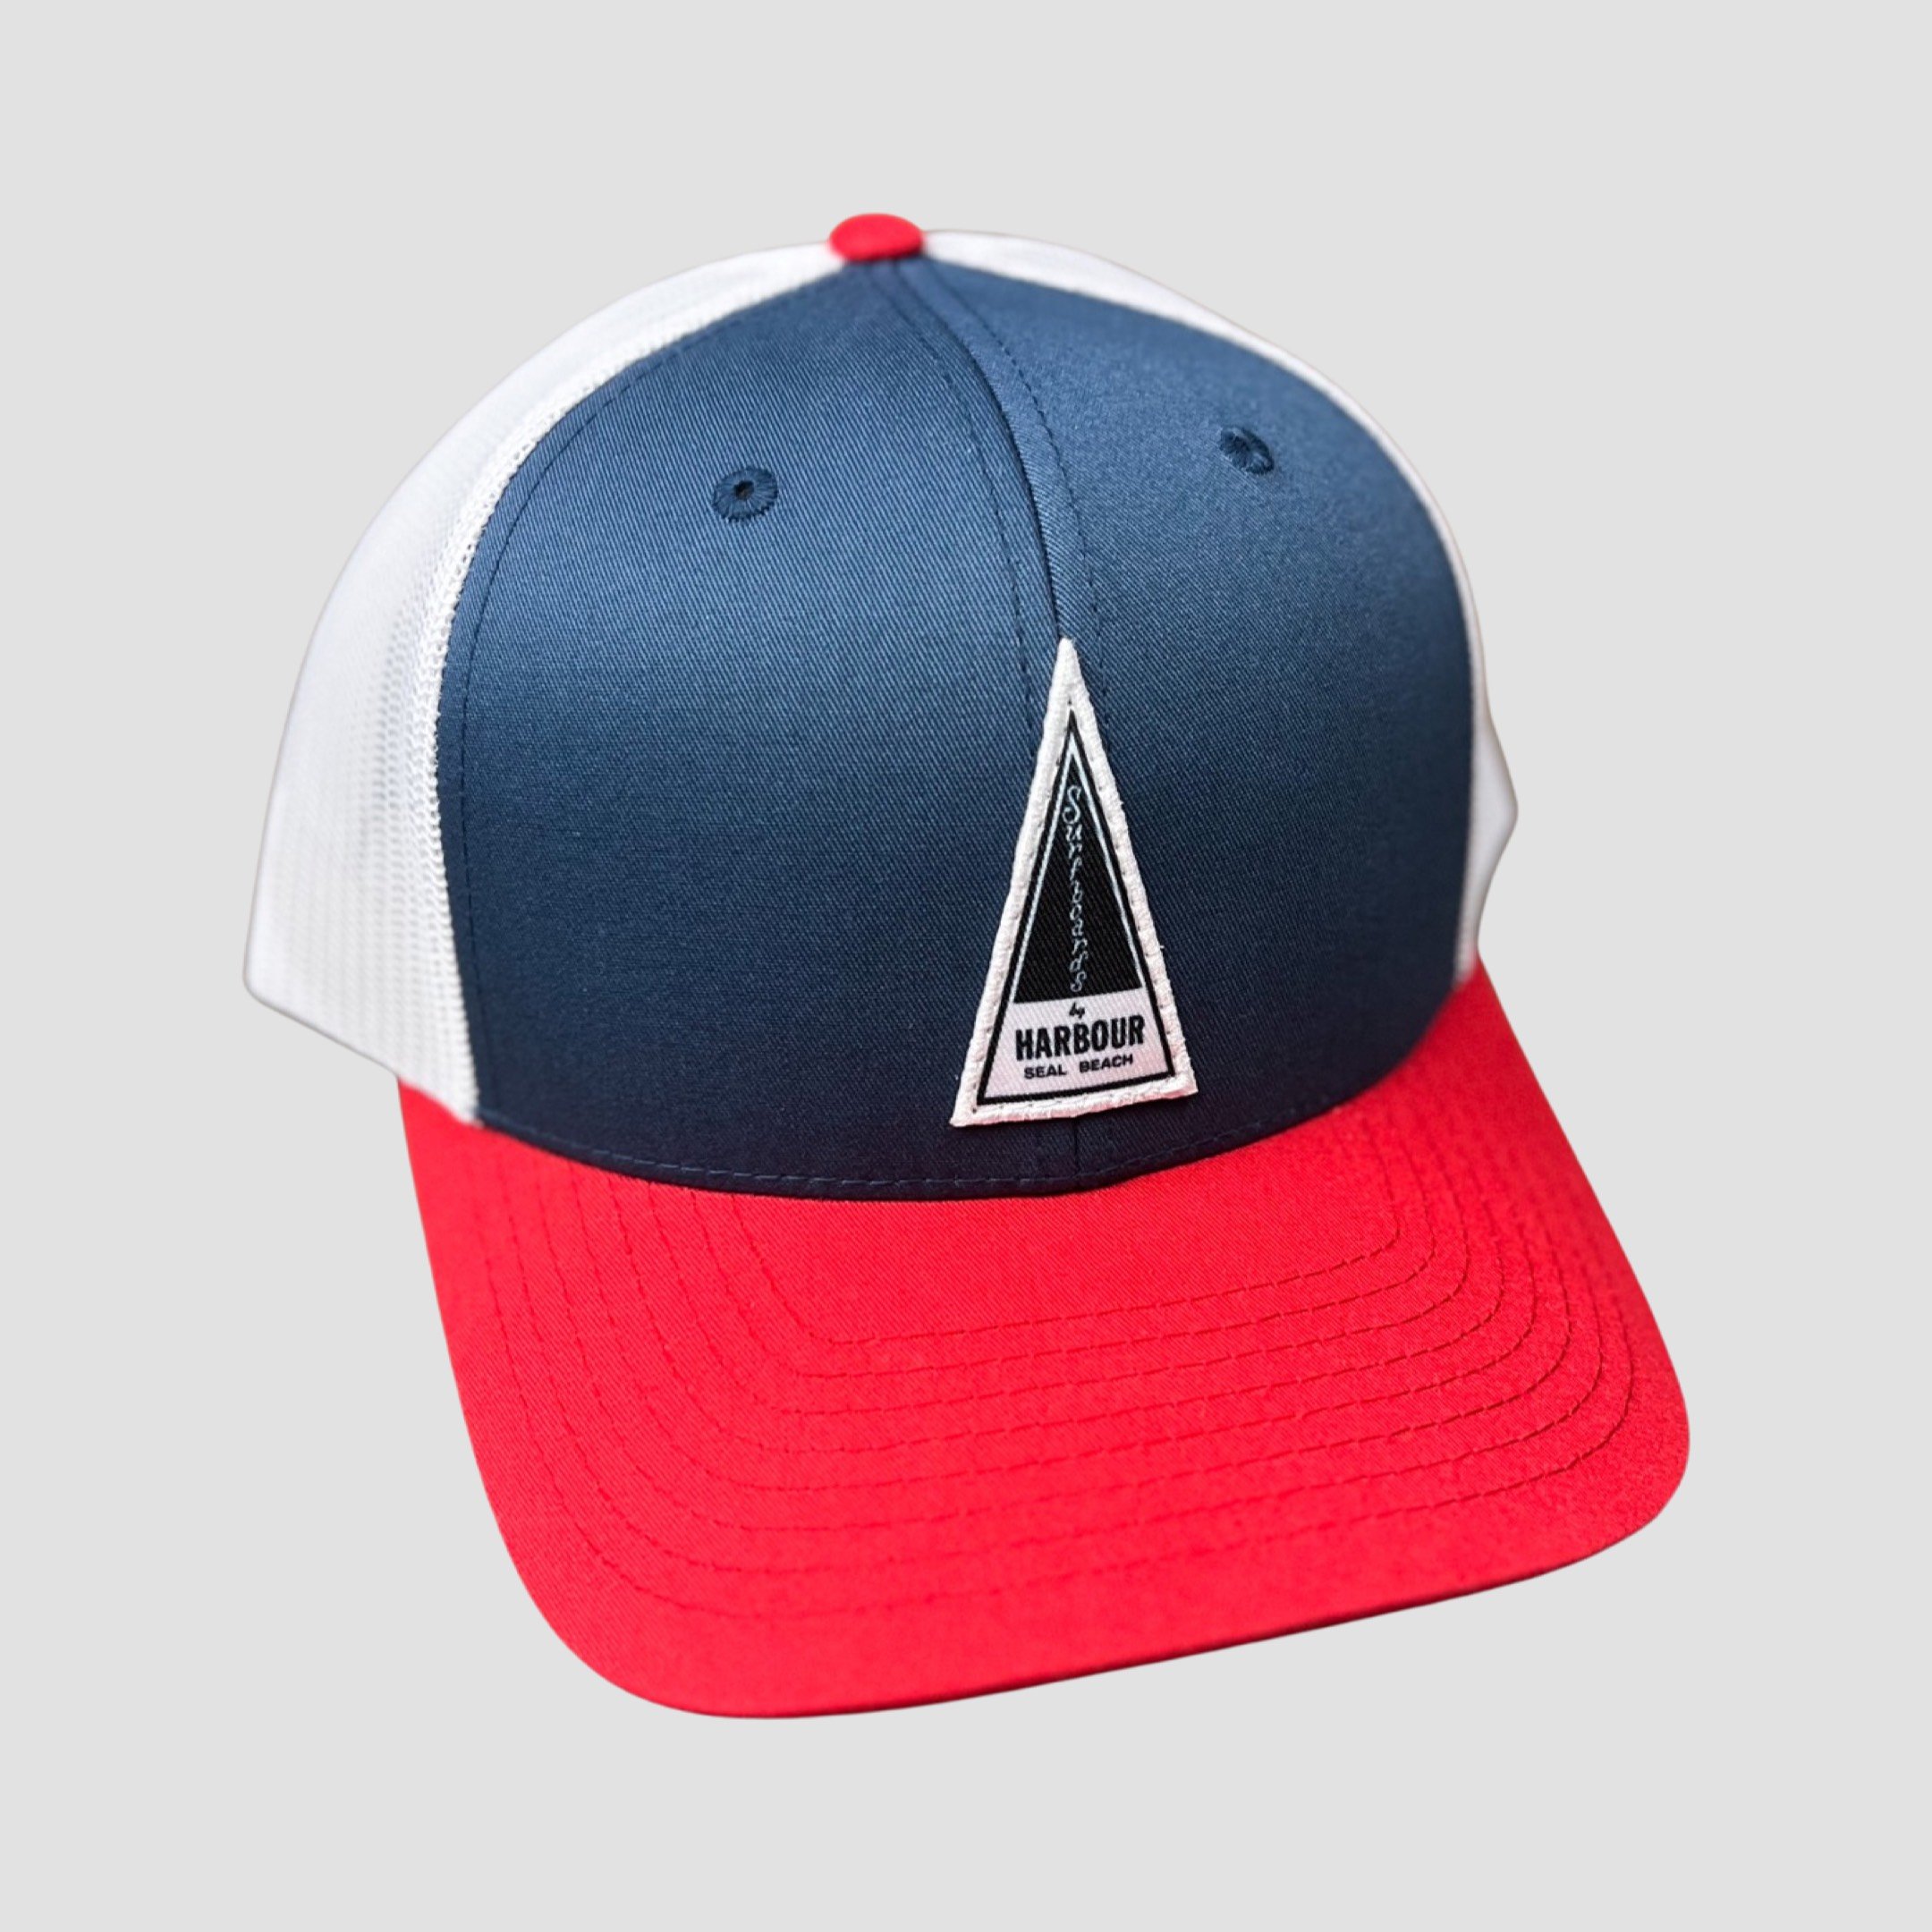 Triangle Trucker - red white and blue